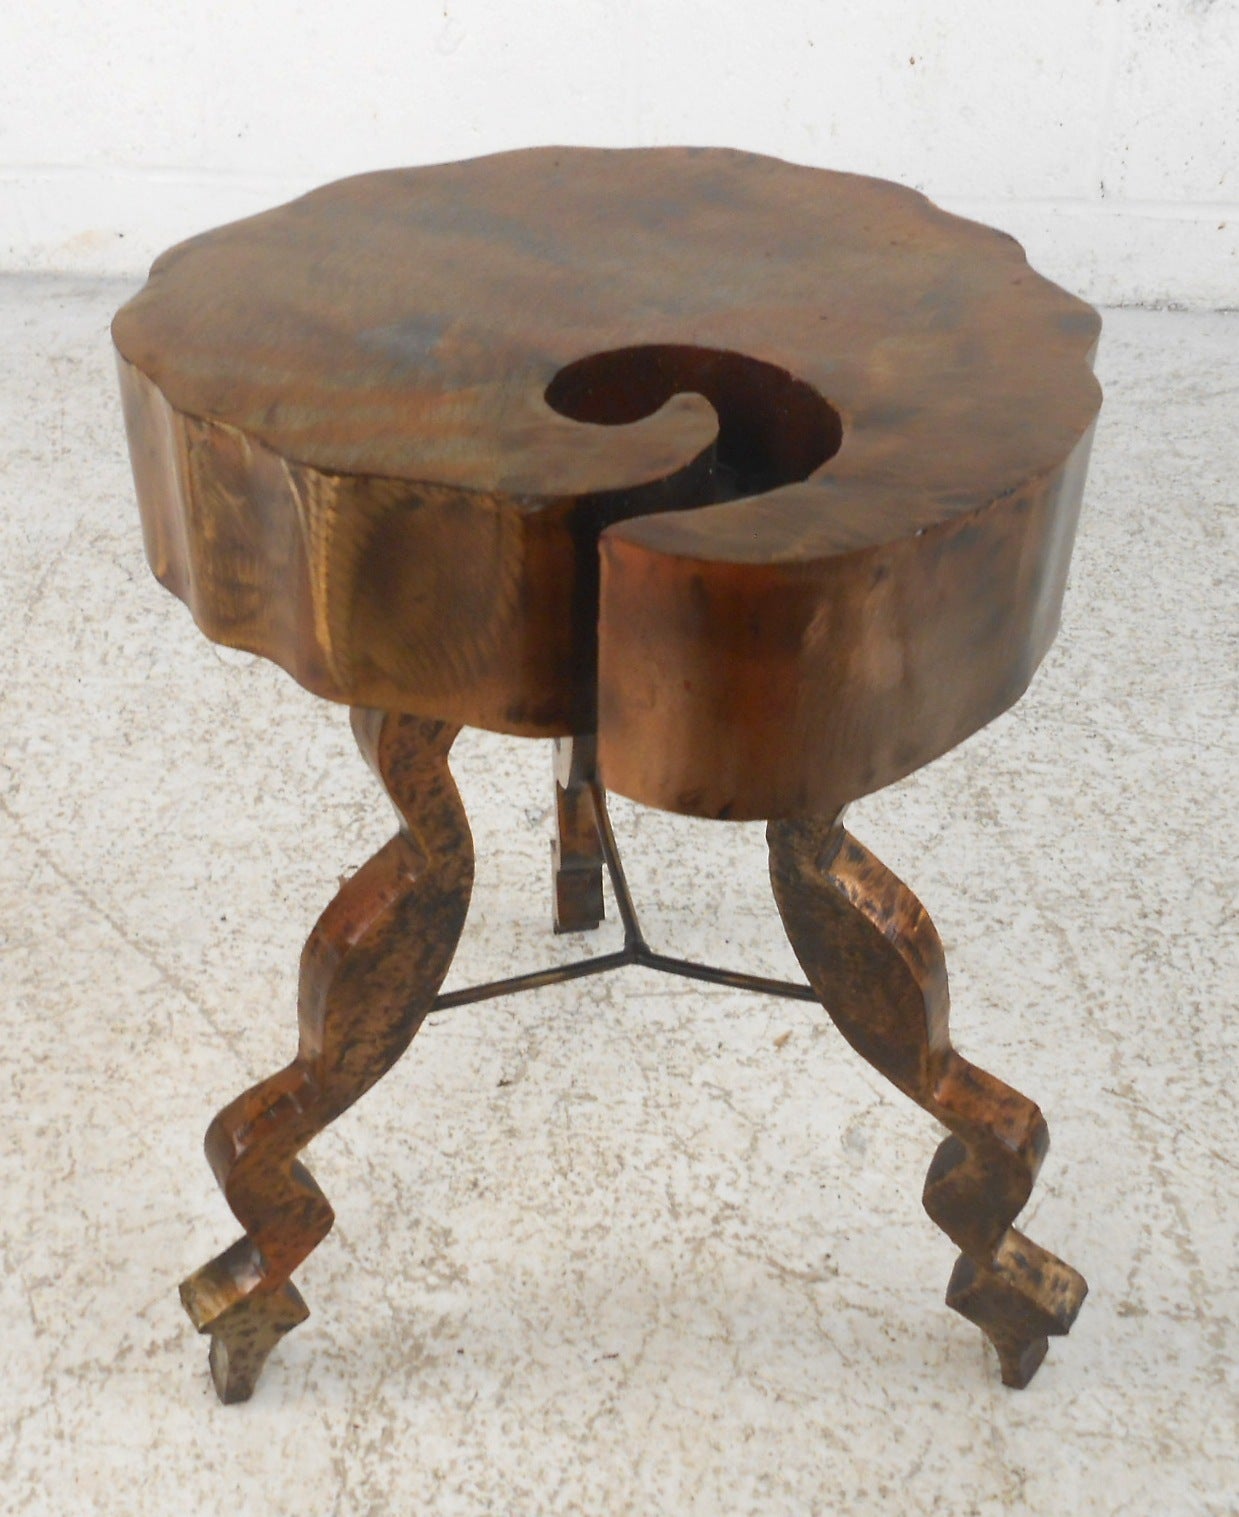 Wild metal side table with 